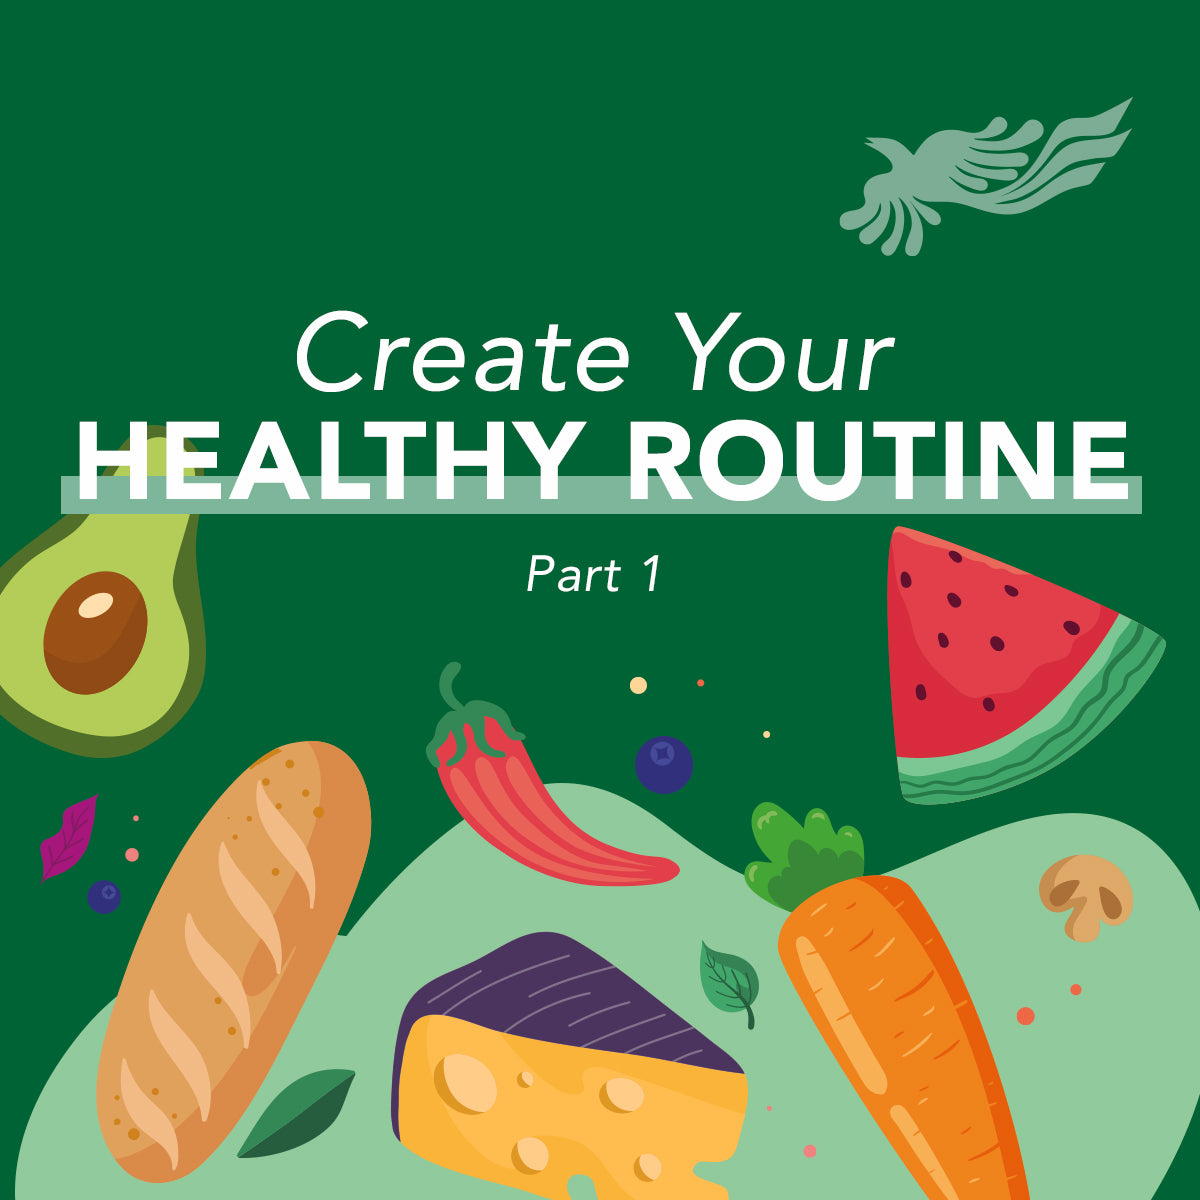 Create Your Healthy Routine (Part 1)